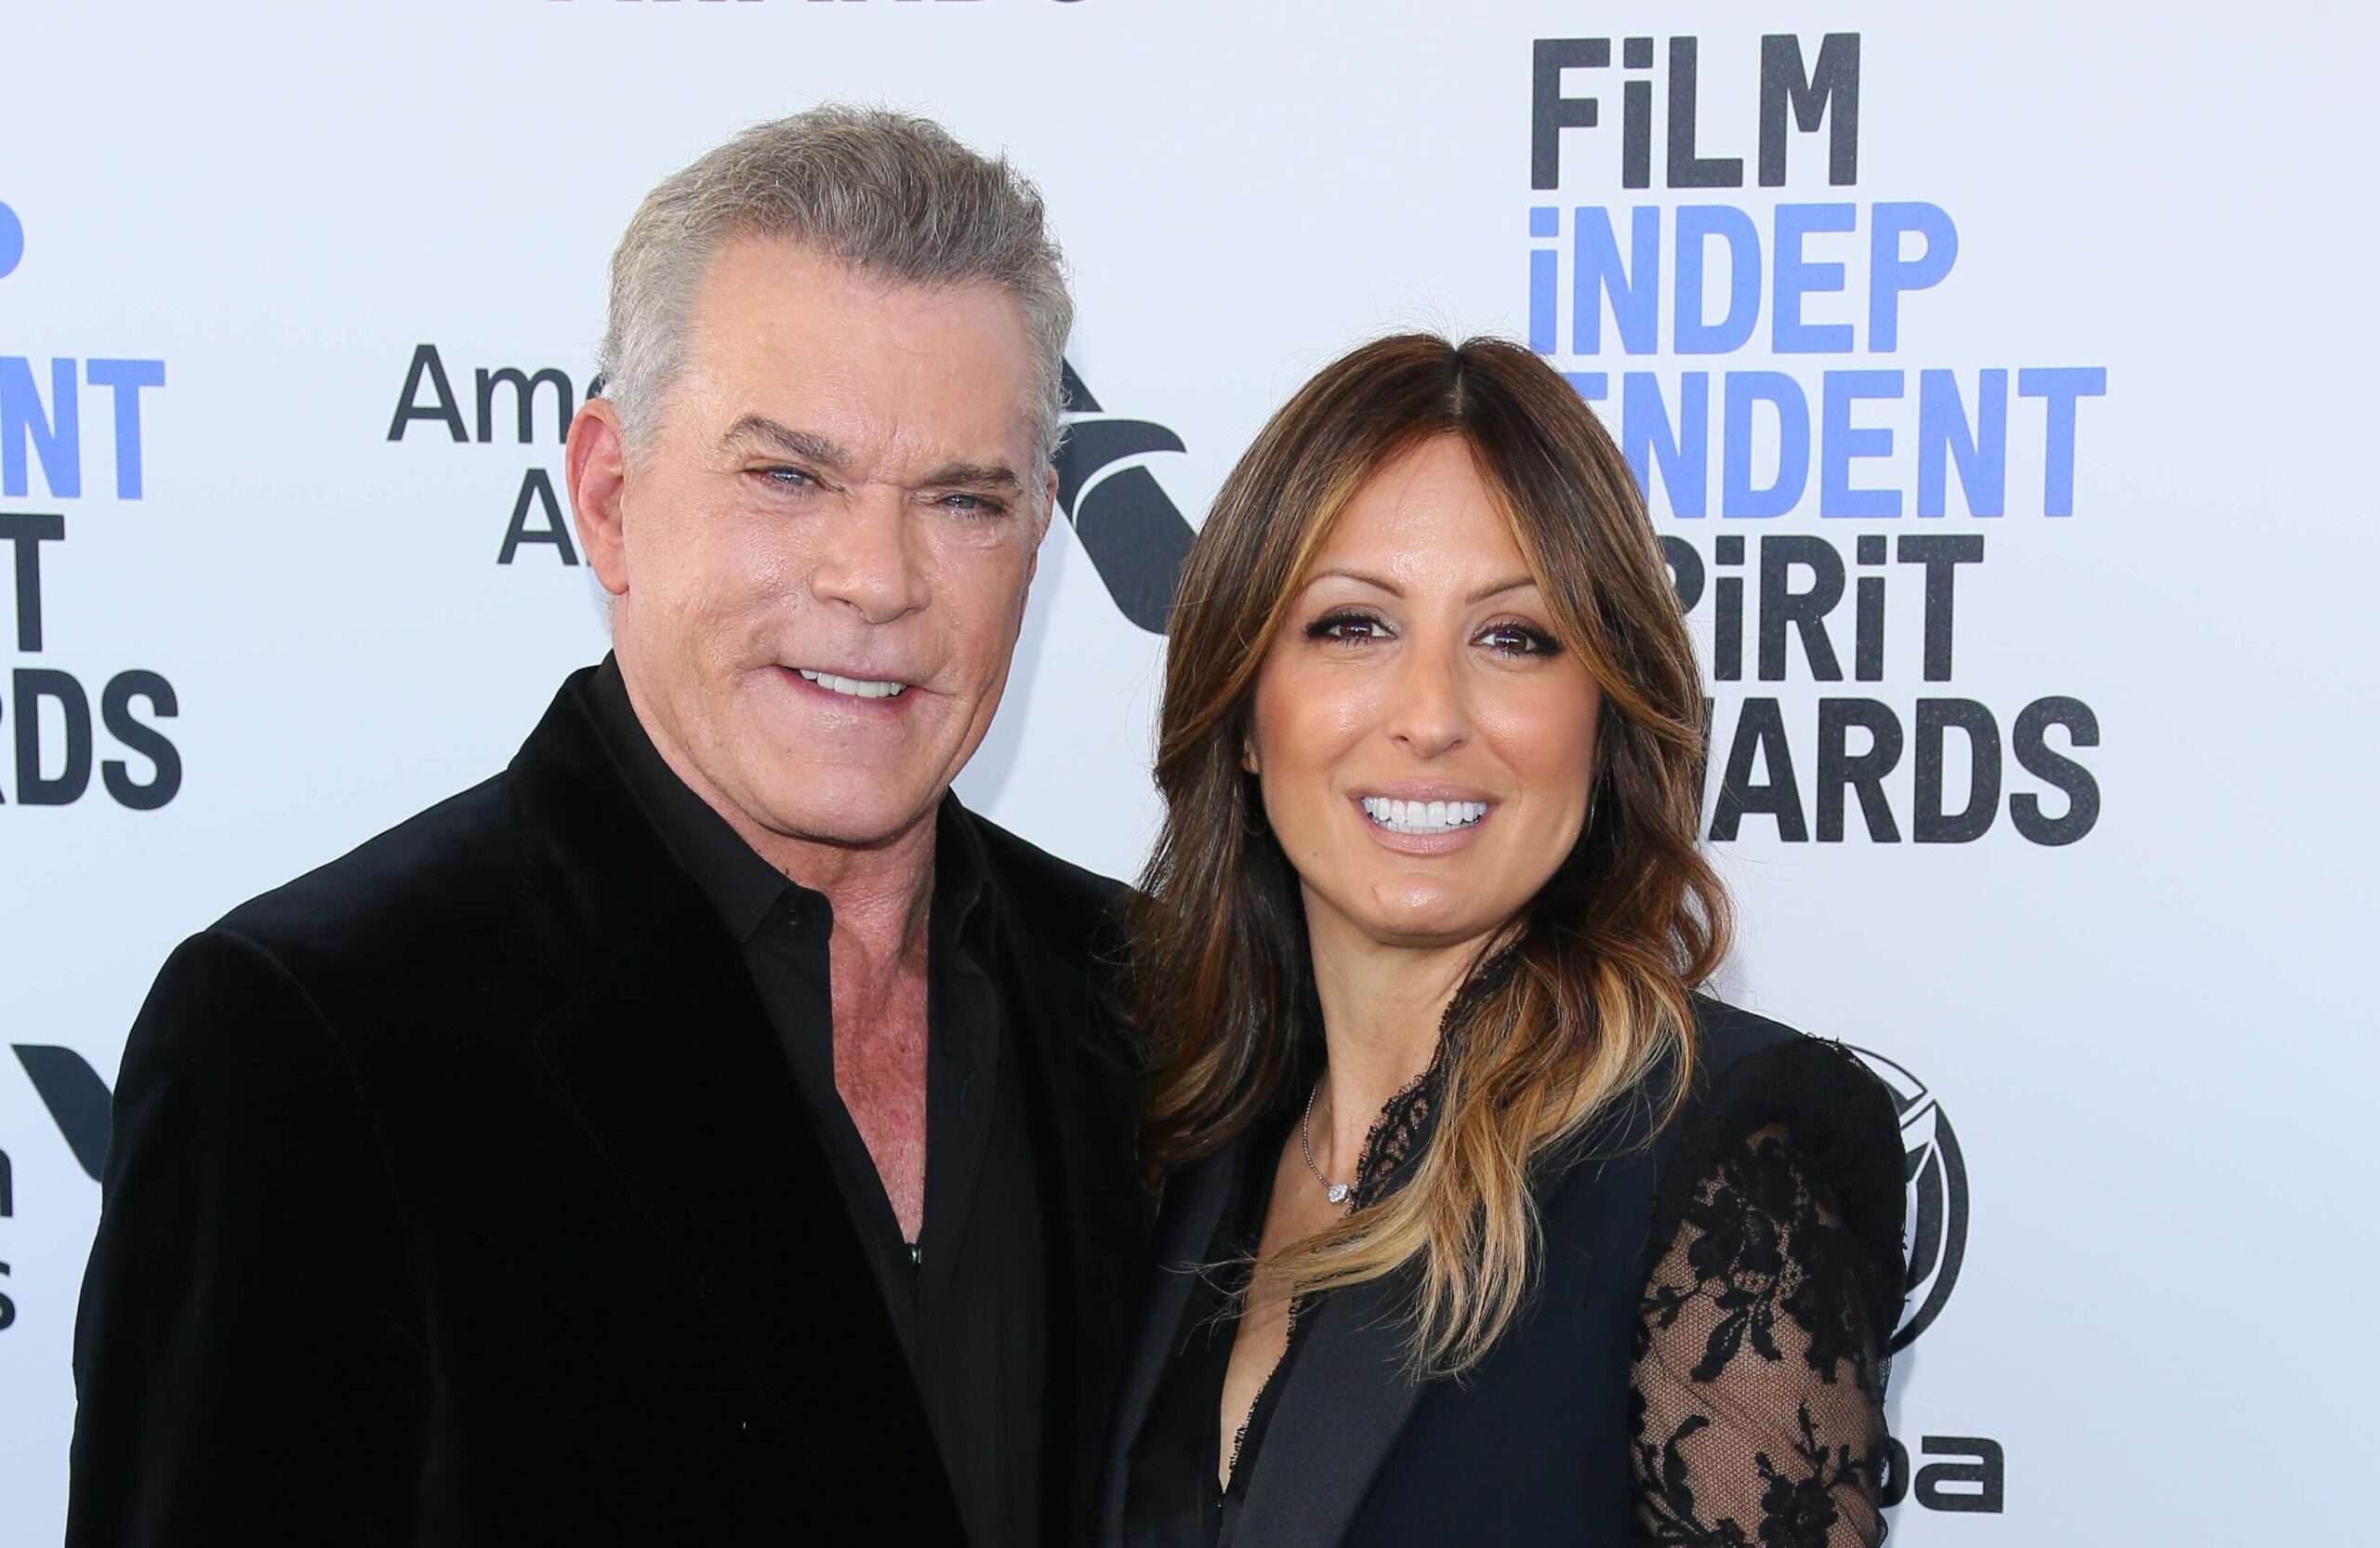 Ray Liotta Biography: Age, Cause of Death, Wife, Daughter, Net Worth, Movies, TV Shows